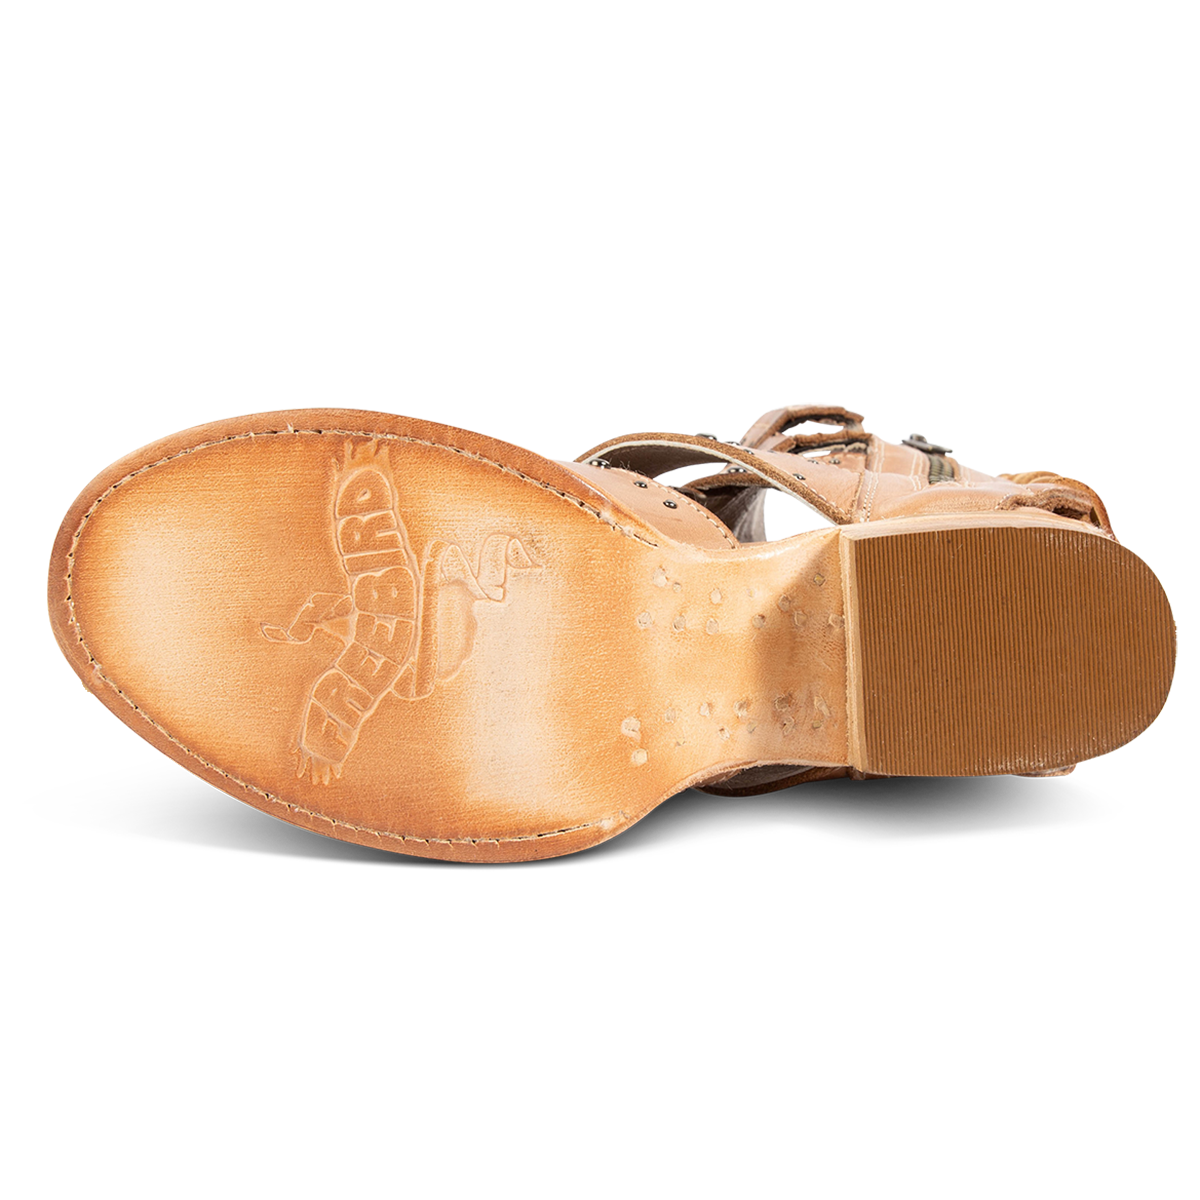 Leather sole imprinted with FREEBIRD on women's Ghost natural leather sandal